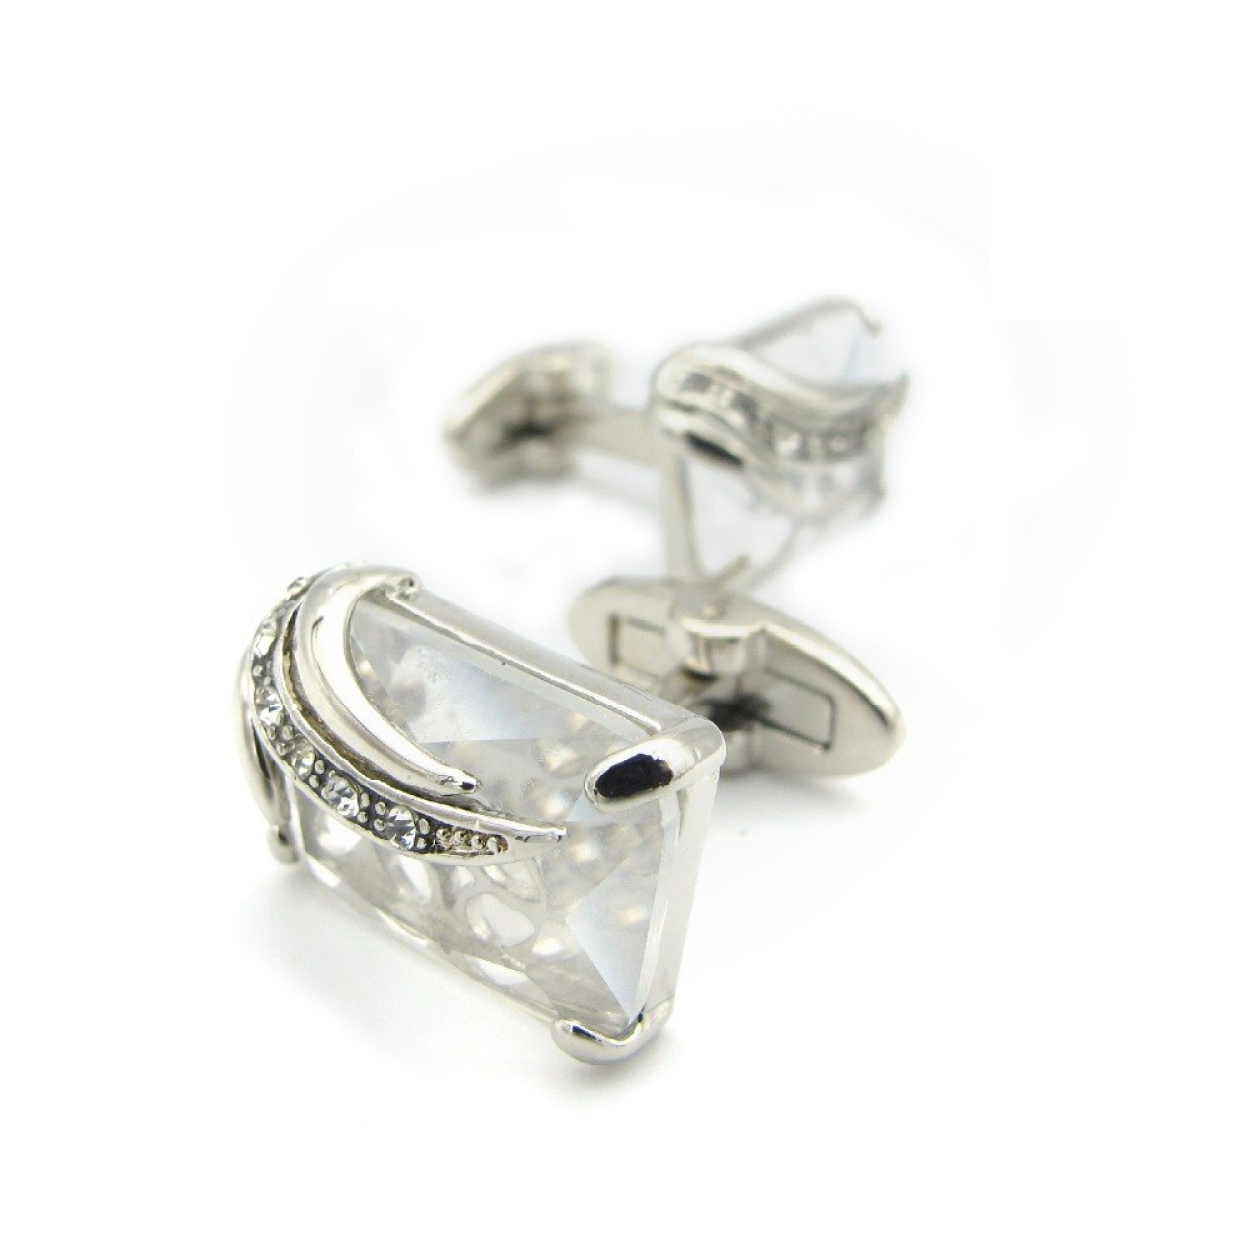 Chrome with Clear Stones Cufflinks